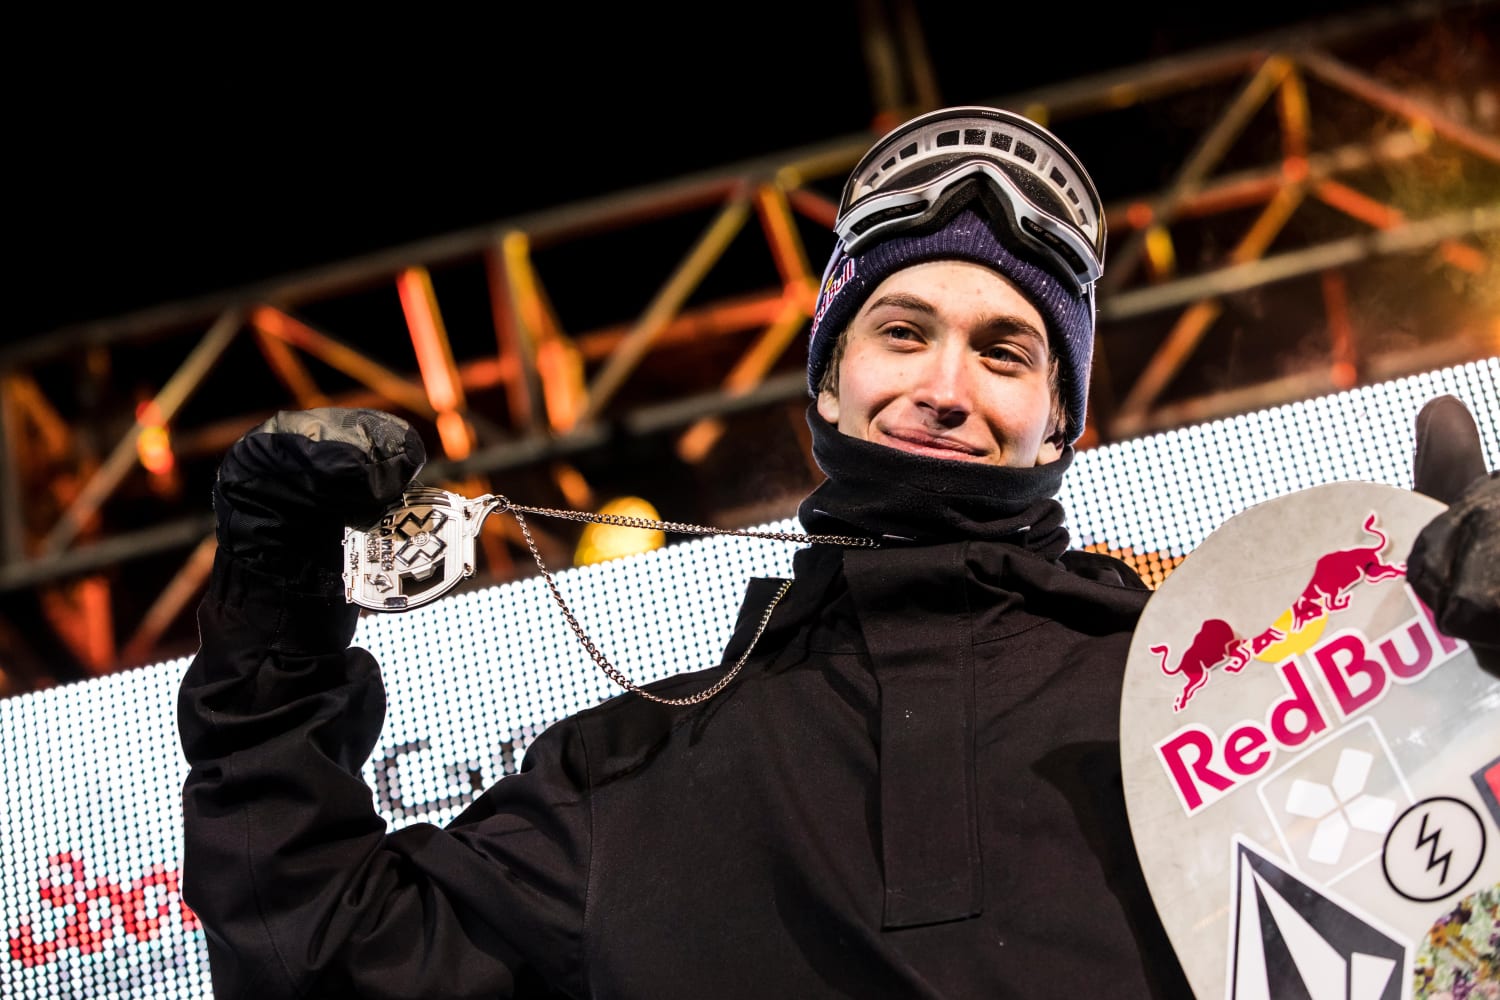 Marcus Kleveland - Interview Marcus Kleveland Whitelines Snowboarding - He was the first ever to complete a quad cork 1800 in competition and won gold in slopestyle and silver in big air at his winter x games debut in 2017.